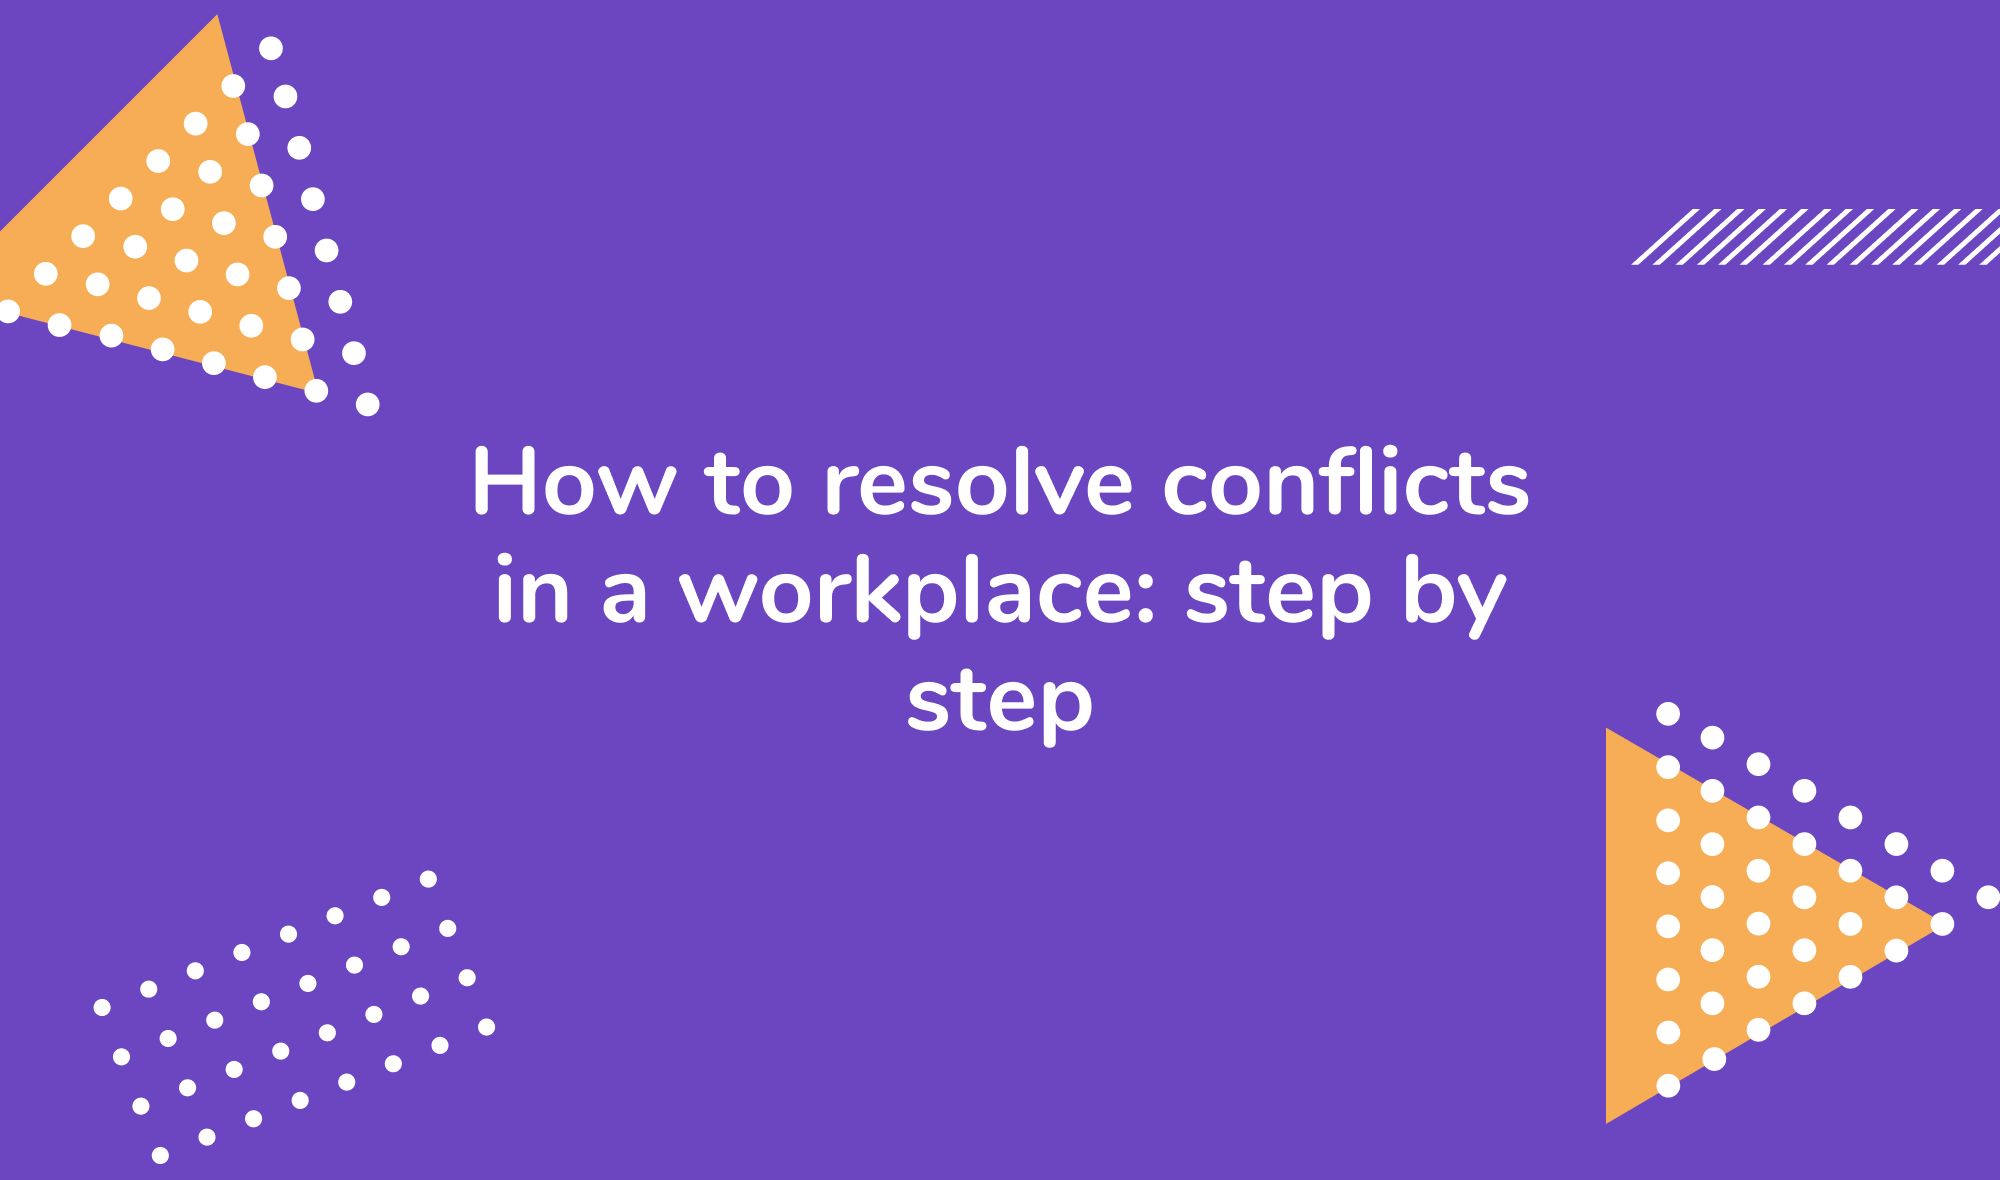 How to resolve conflicts in a workplace: step by step